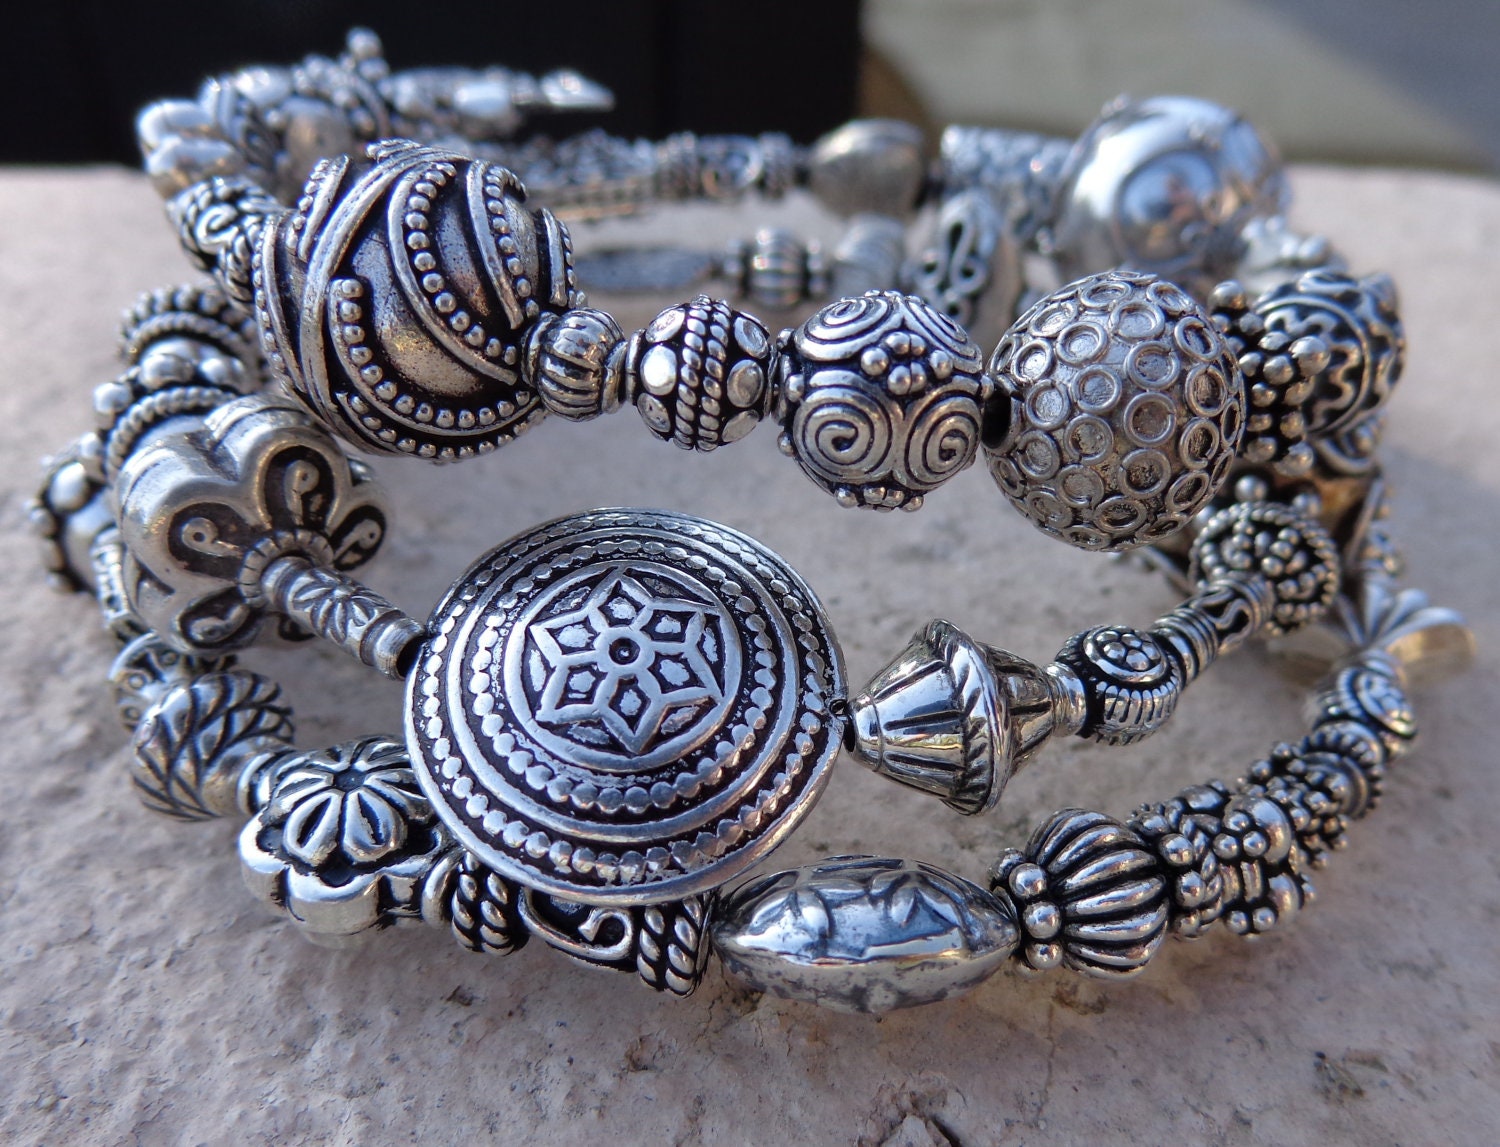 Loose fitting large coiled Sterling Silver Bali Bead Bangle Bracelet, One-of-a-kind Handmade Sterling Silver Bali Beads